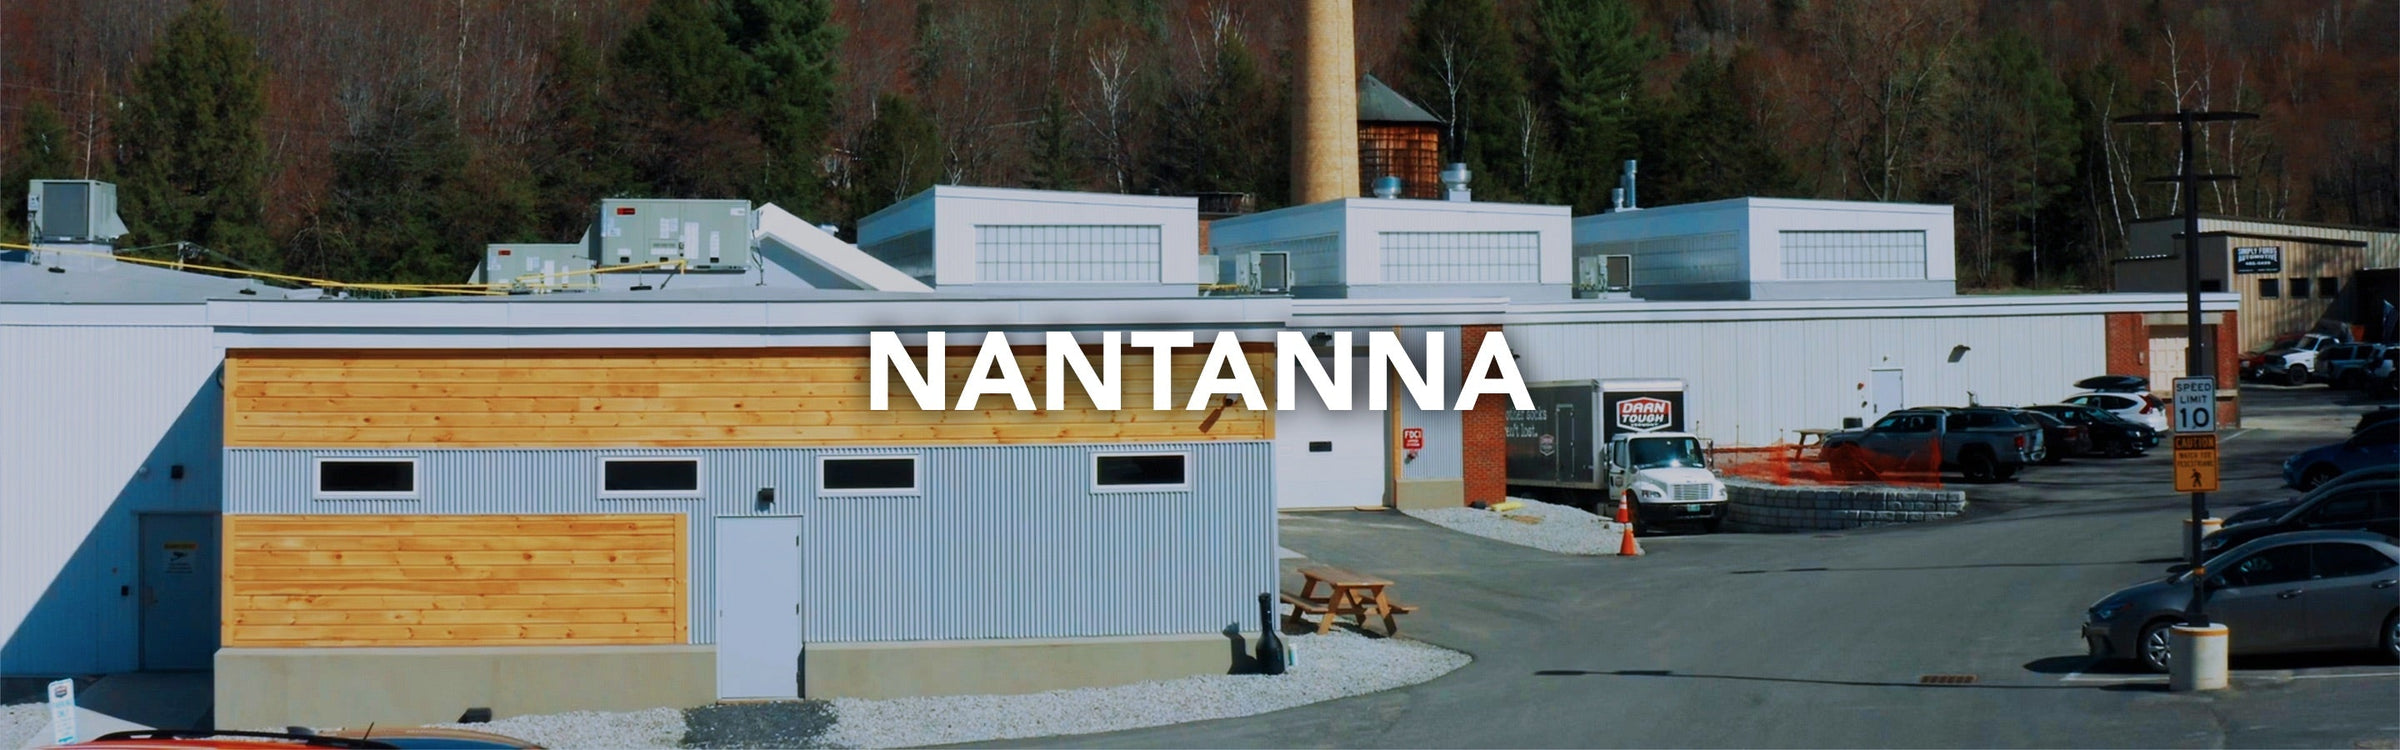 Nantanna - Darn Tough's building in Nantanna, an old Mill converted to support the sock finishing process